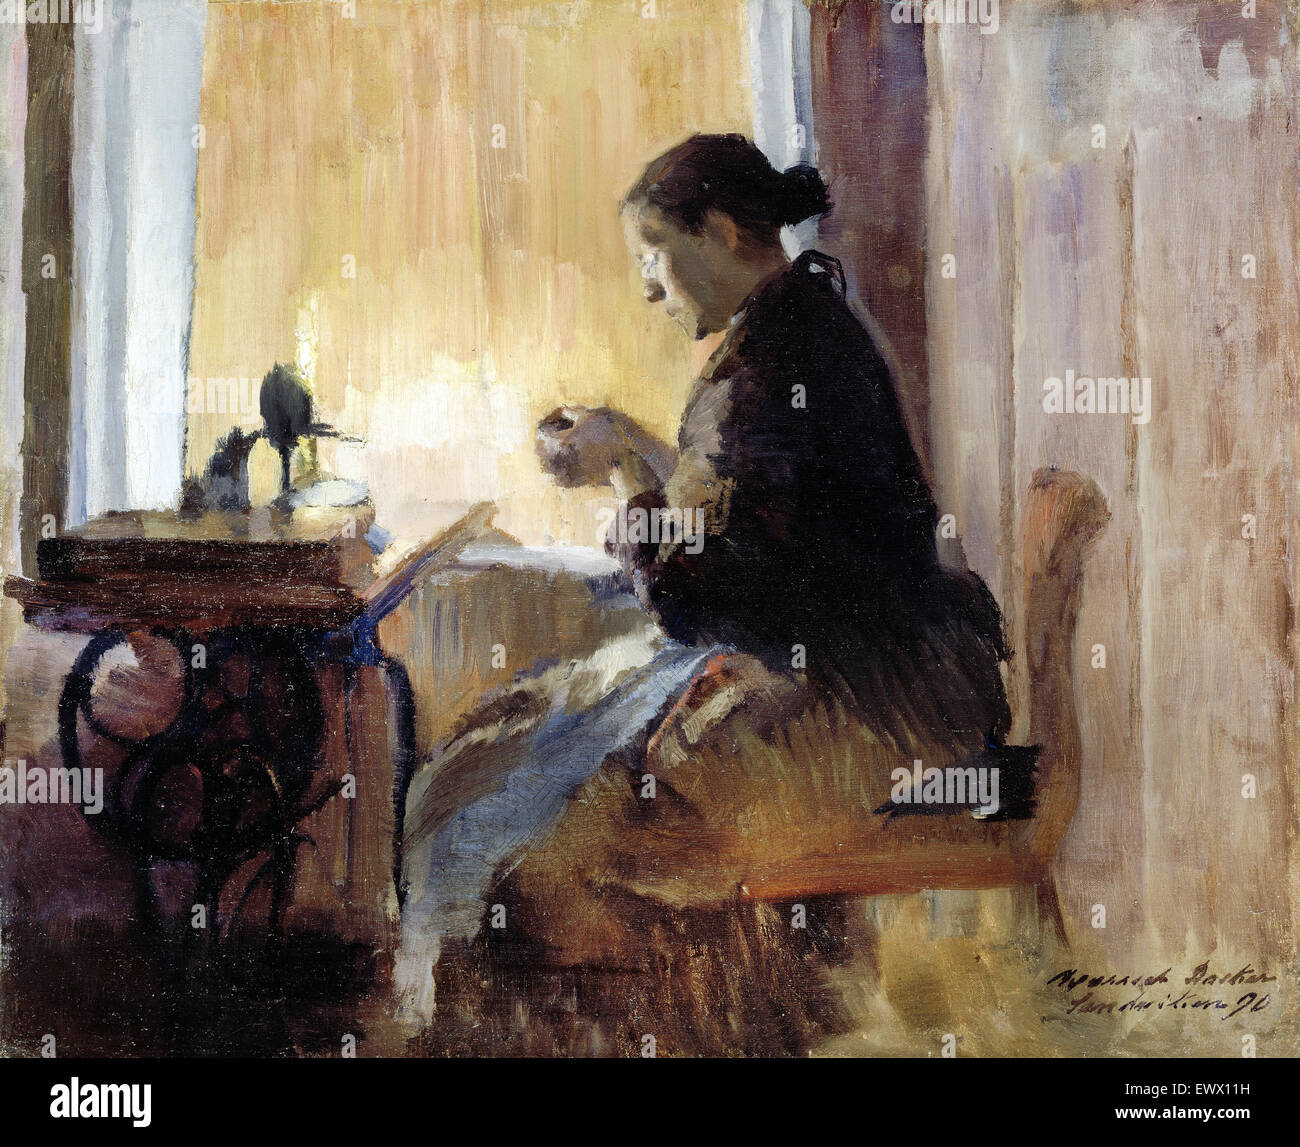 Harriet Backer, By Lamp Light 1890 Oil on canvas. The National Museum of Art, Architecture and Design, Oslo, Norway. Stock Photo